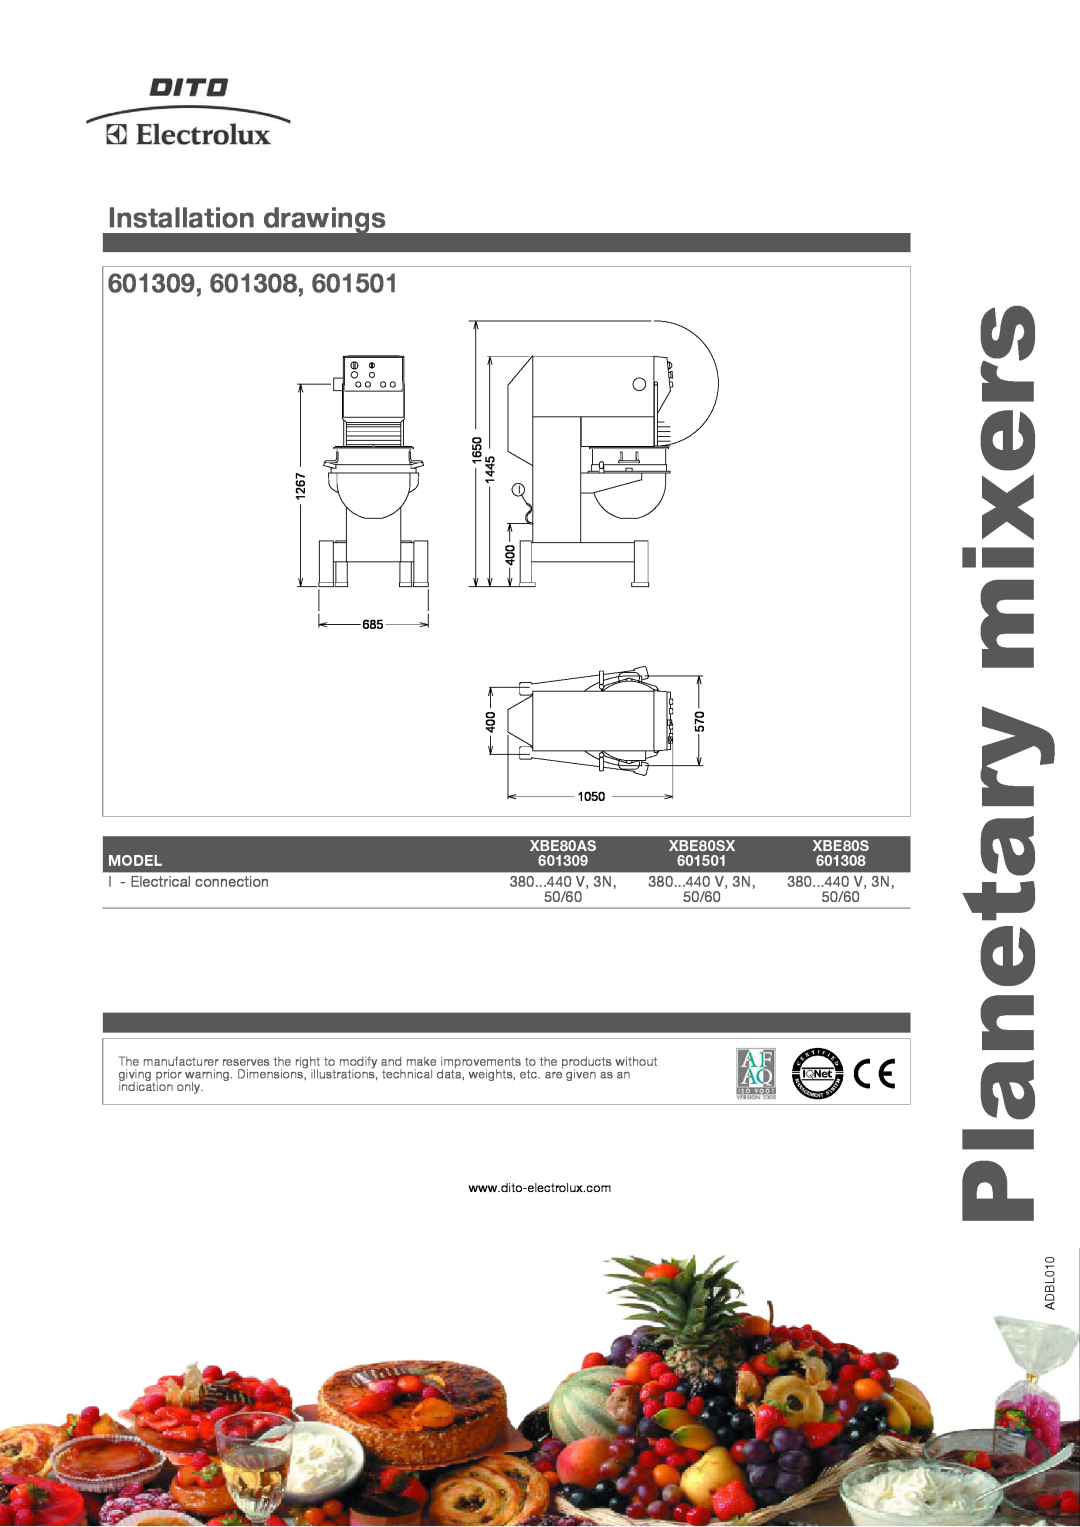 Electrolux XBE80SX, XBE80AS manual Installation drawings, 601309, 601308, mixers, Planetary 